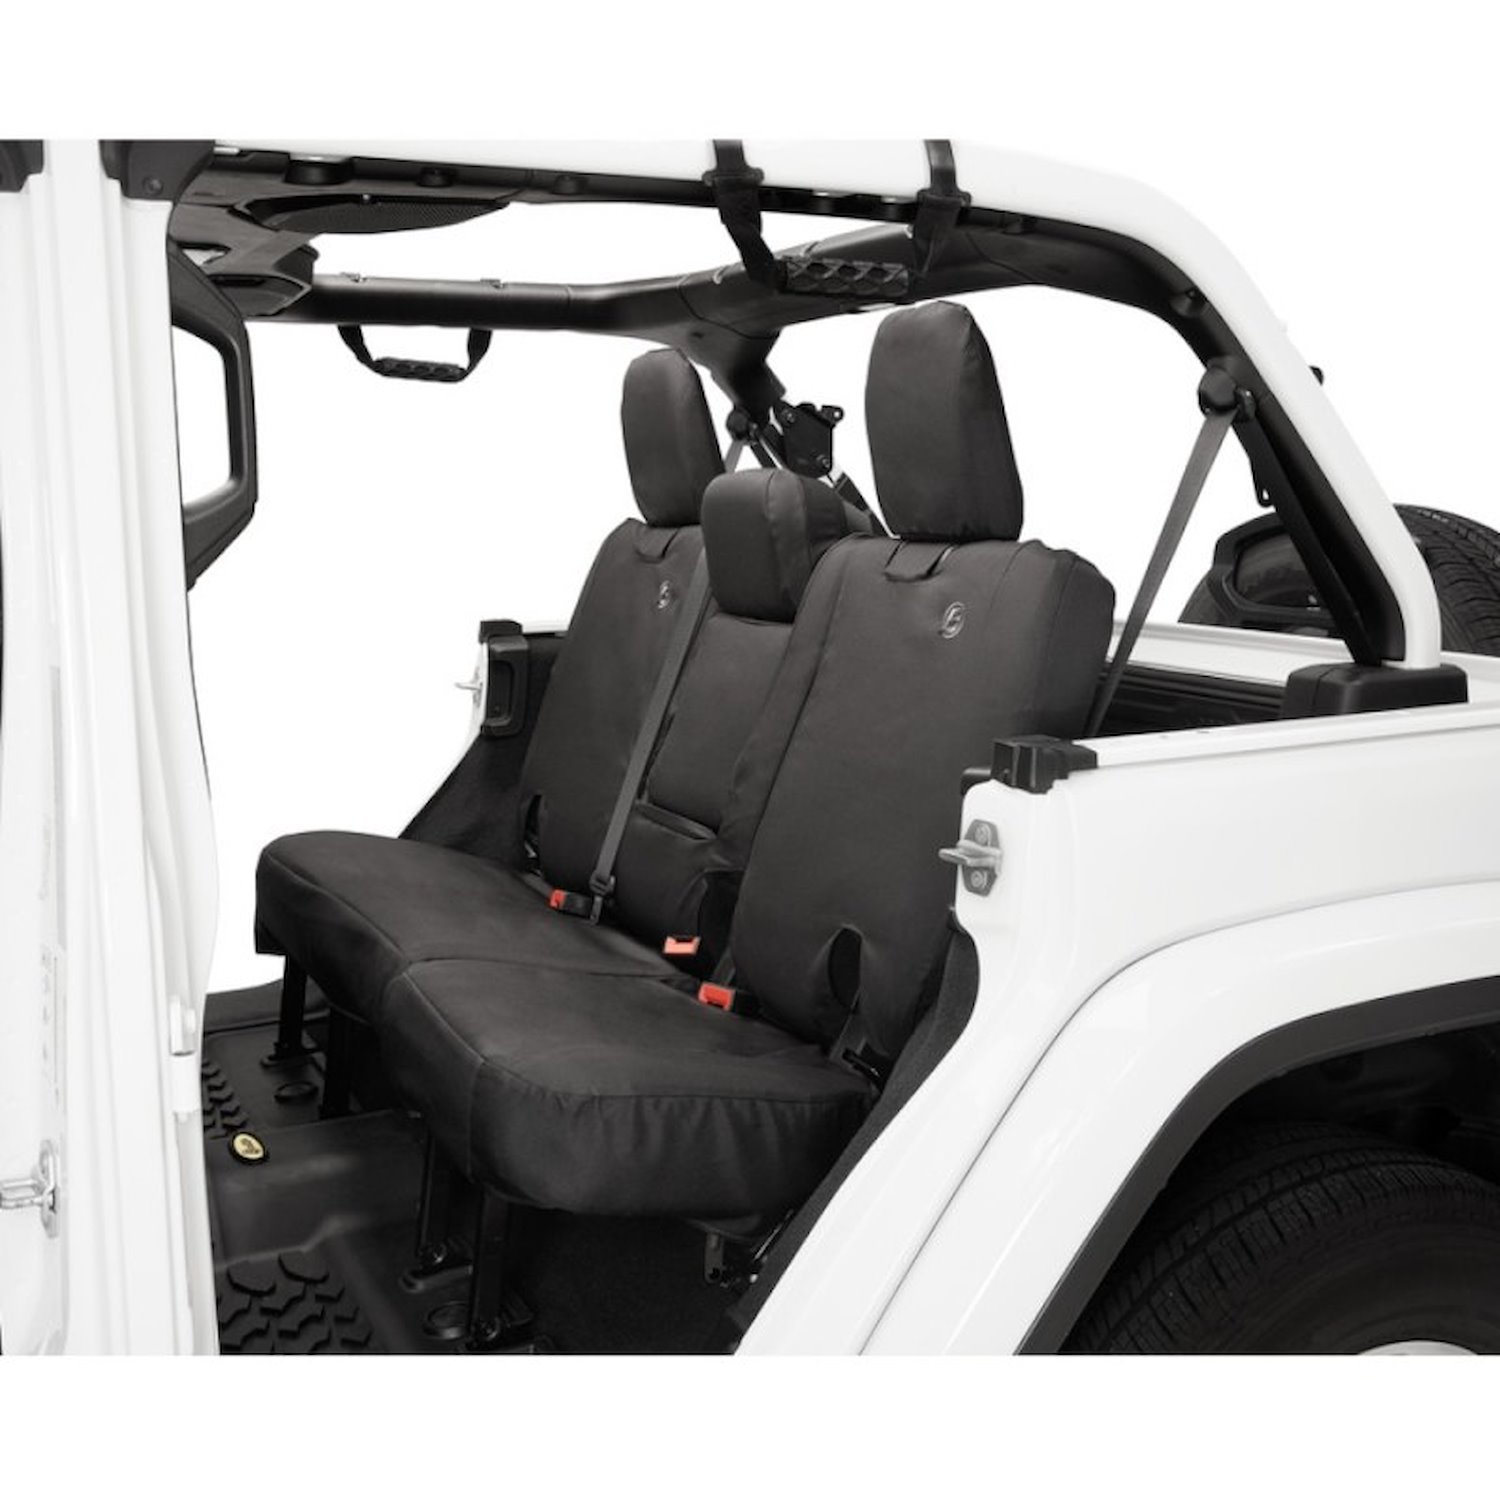 Seat Covers, Black Diamond, Fits Factory Seats w/Fold Down Arm Rests, Sold Individually,